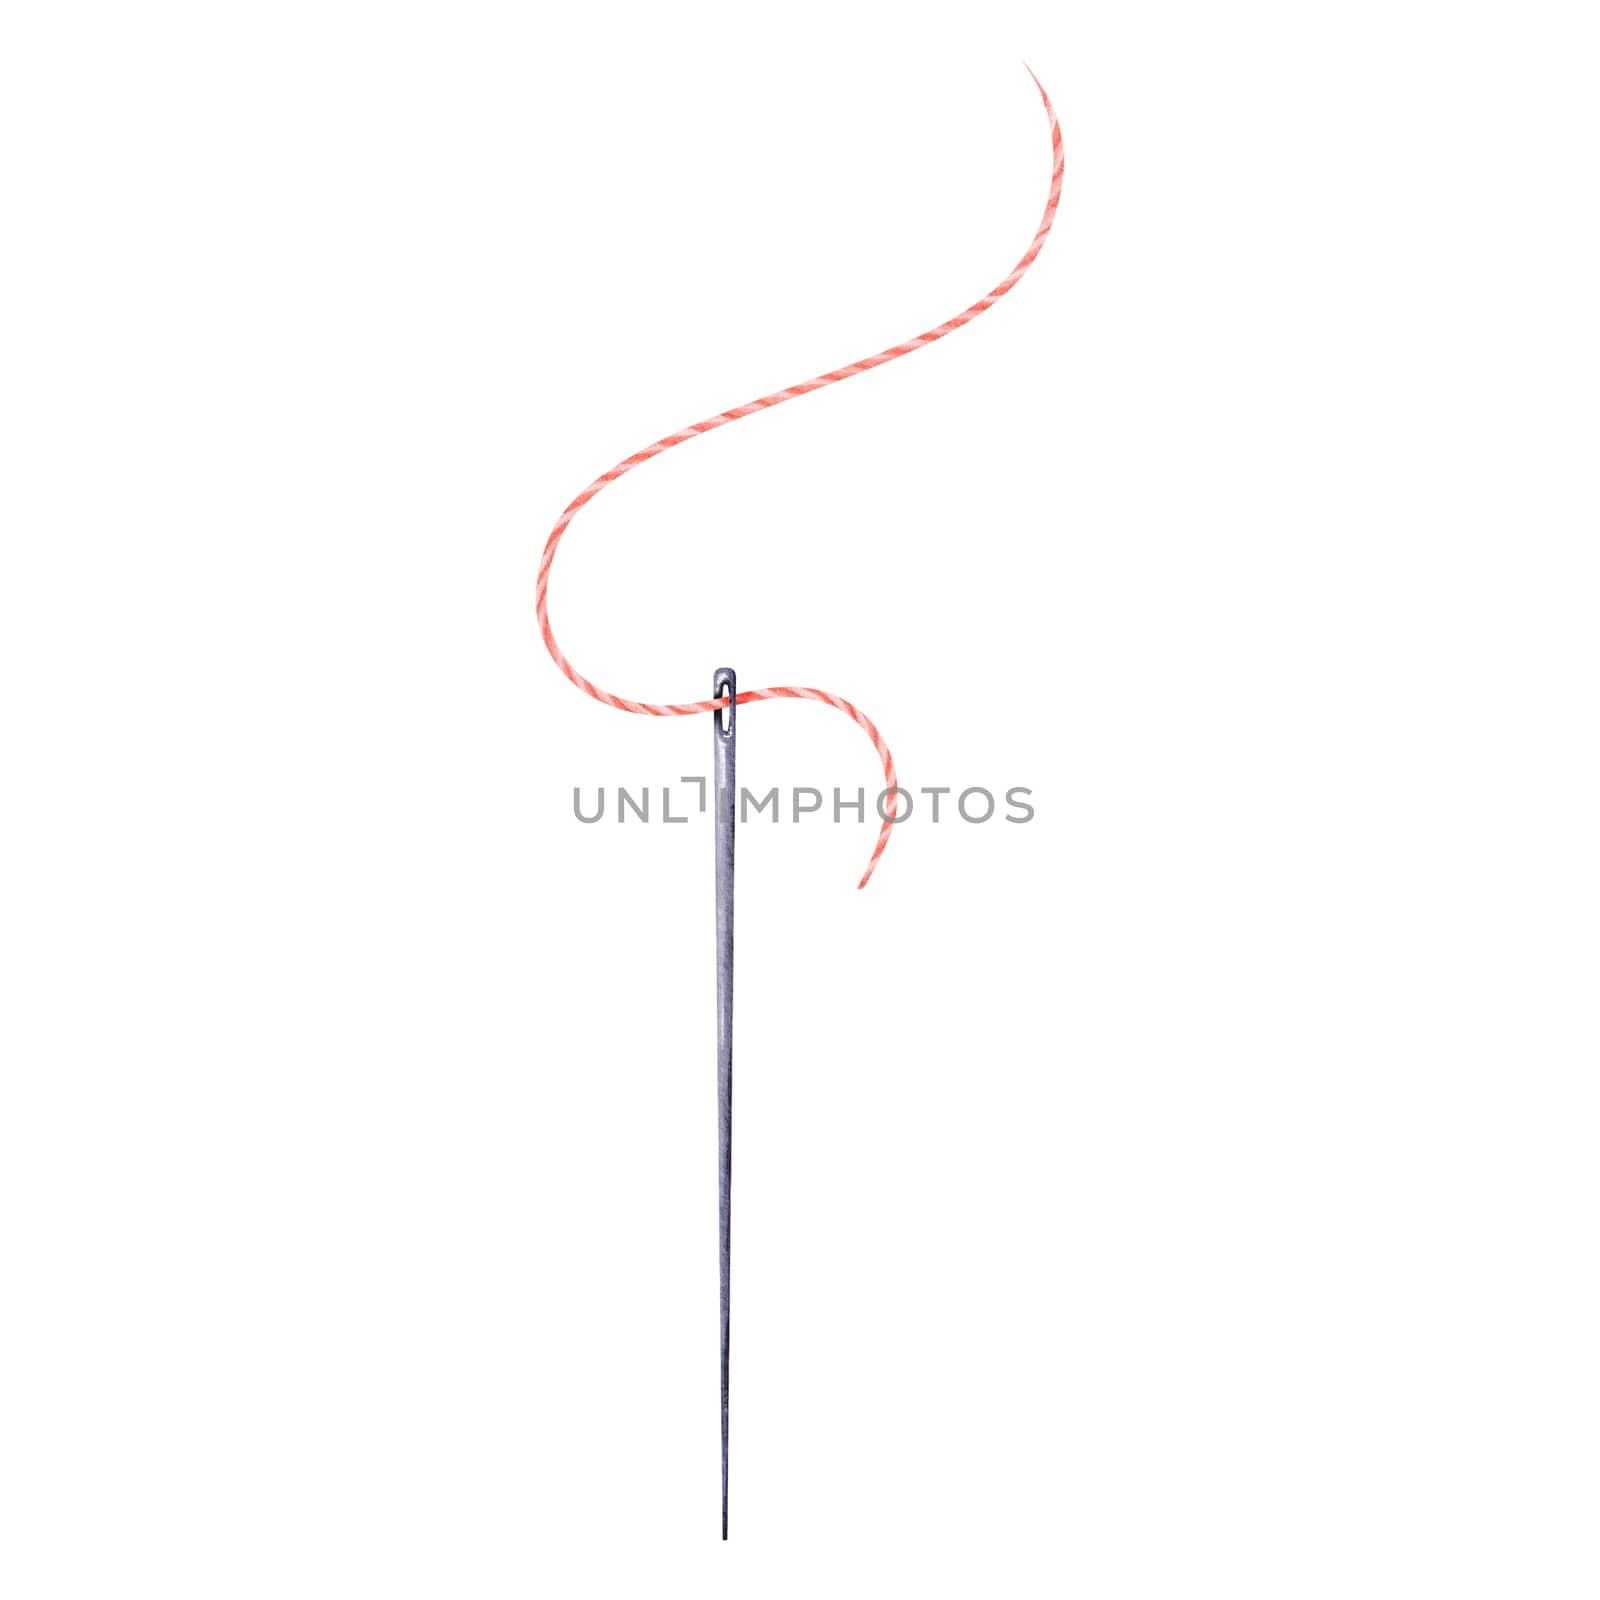 A steel needle with a pink thread. Isolated object. Watercolor illustration. Ideal for sewing-related logos, crafting enthusiasts, needlework businesses, and DIY-themed designs.